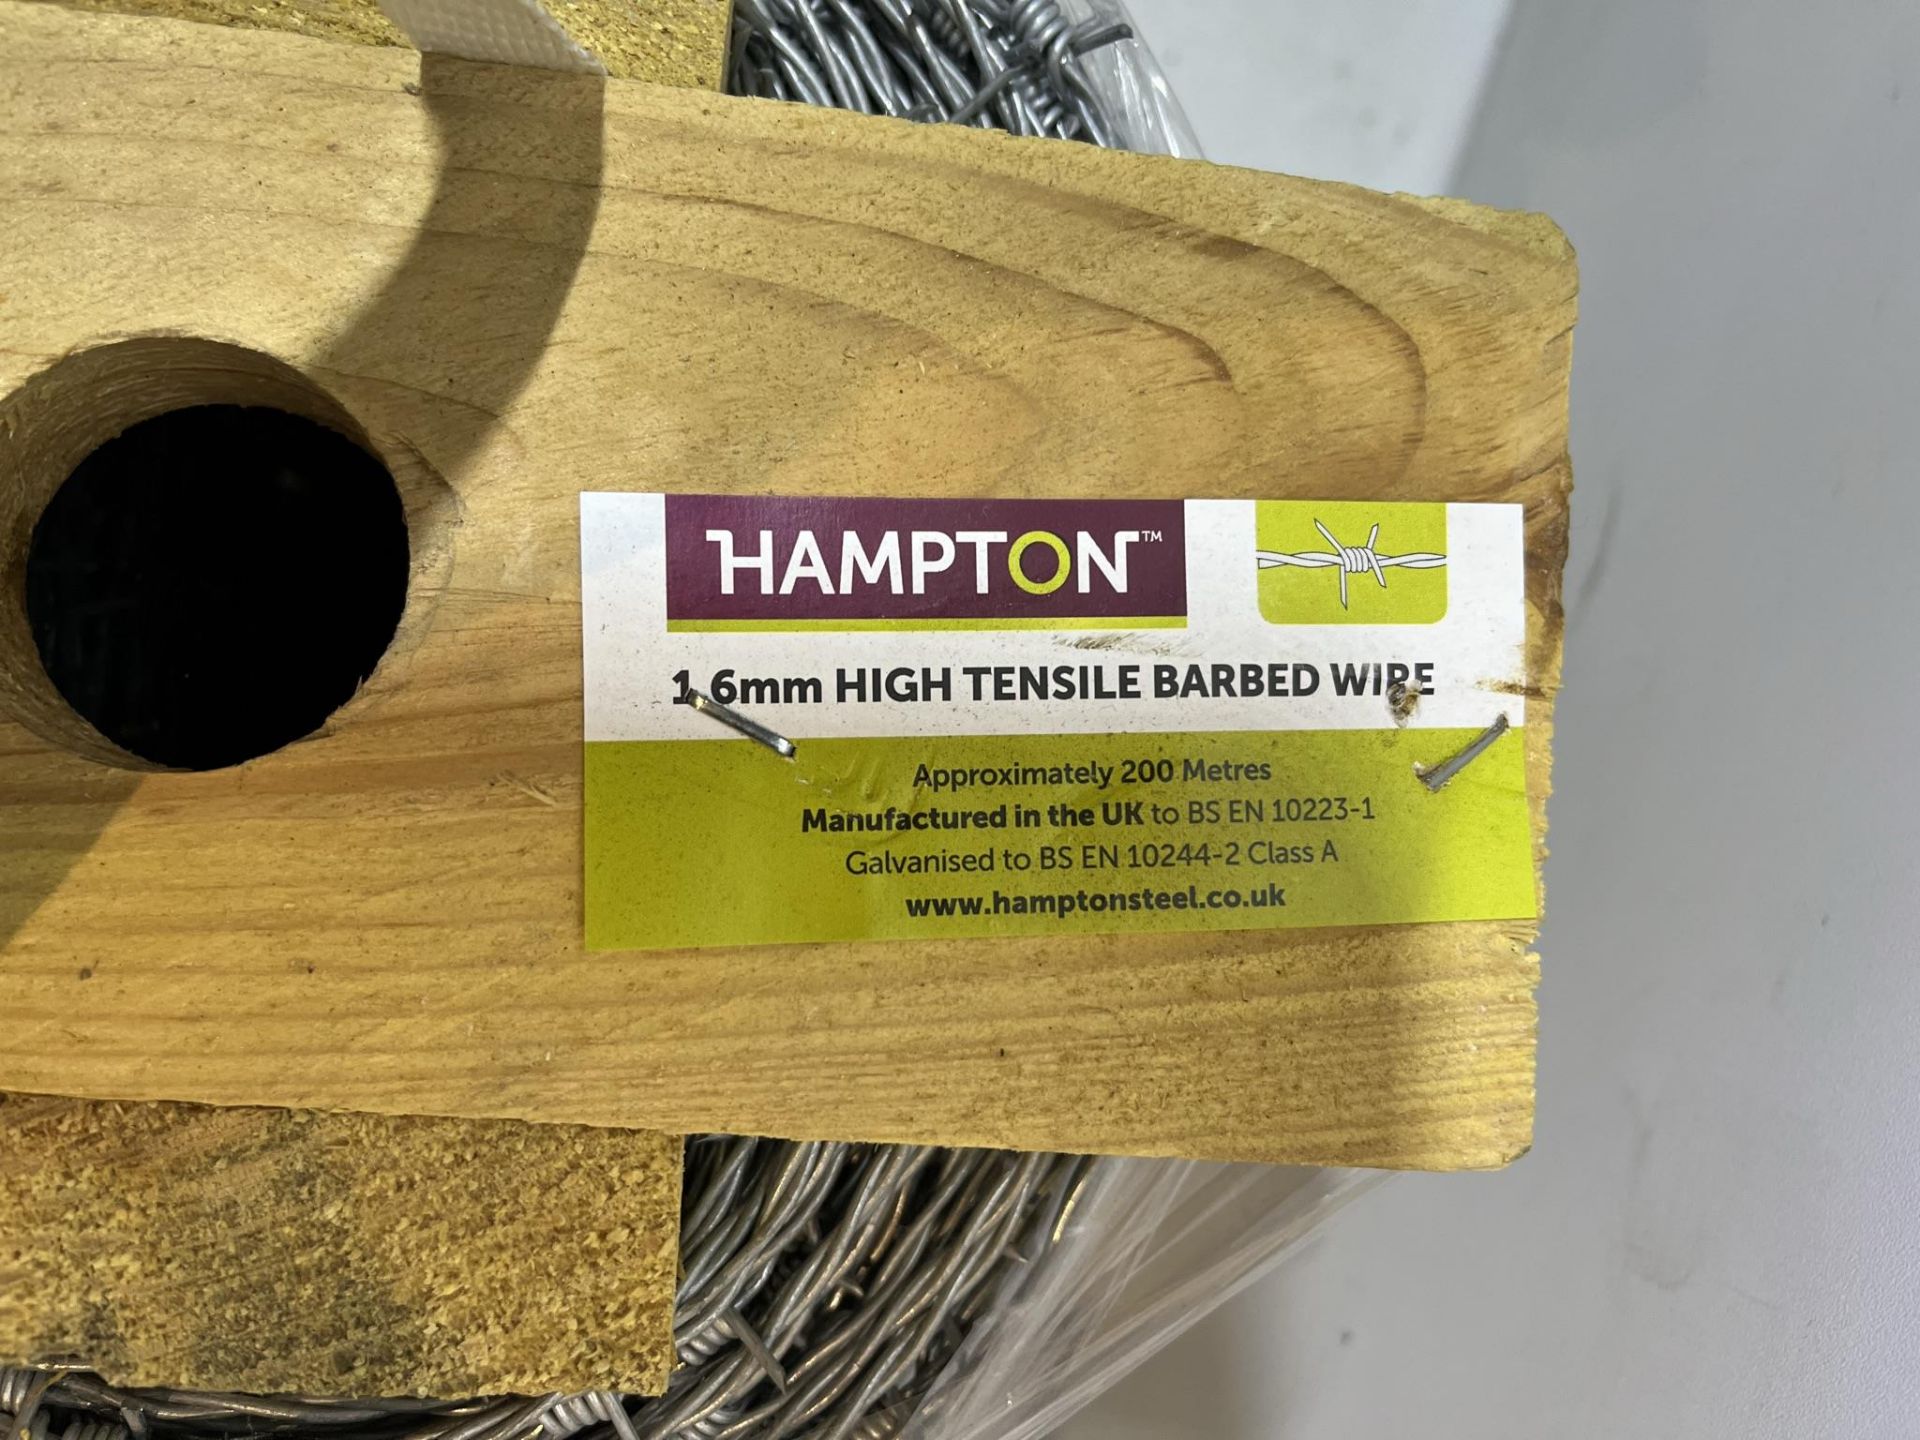 2 x Reels Of Hampton High Tensile Barbed Wire - Image 4 of 5